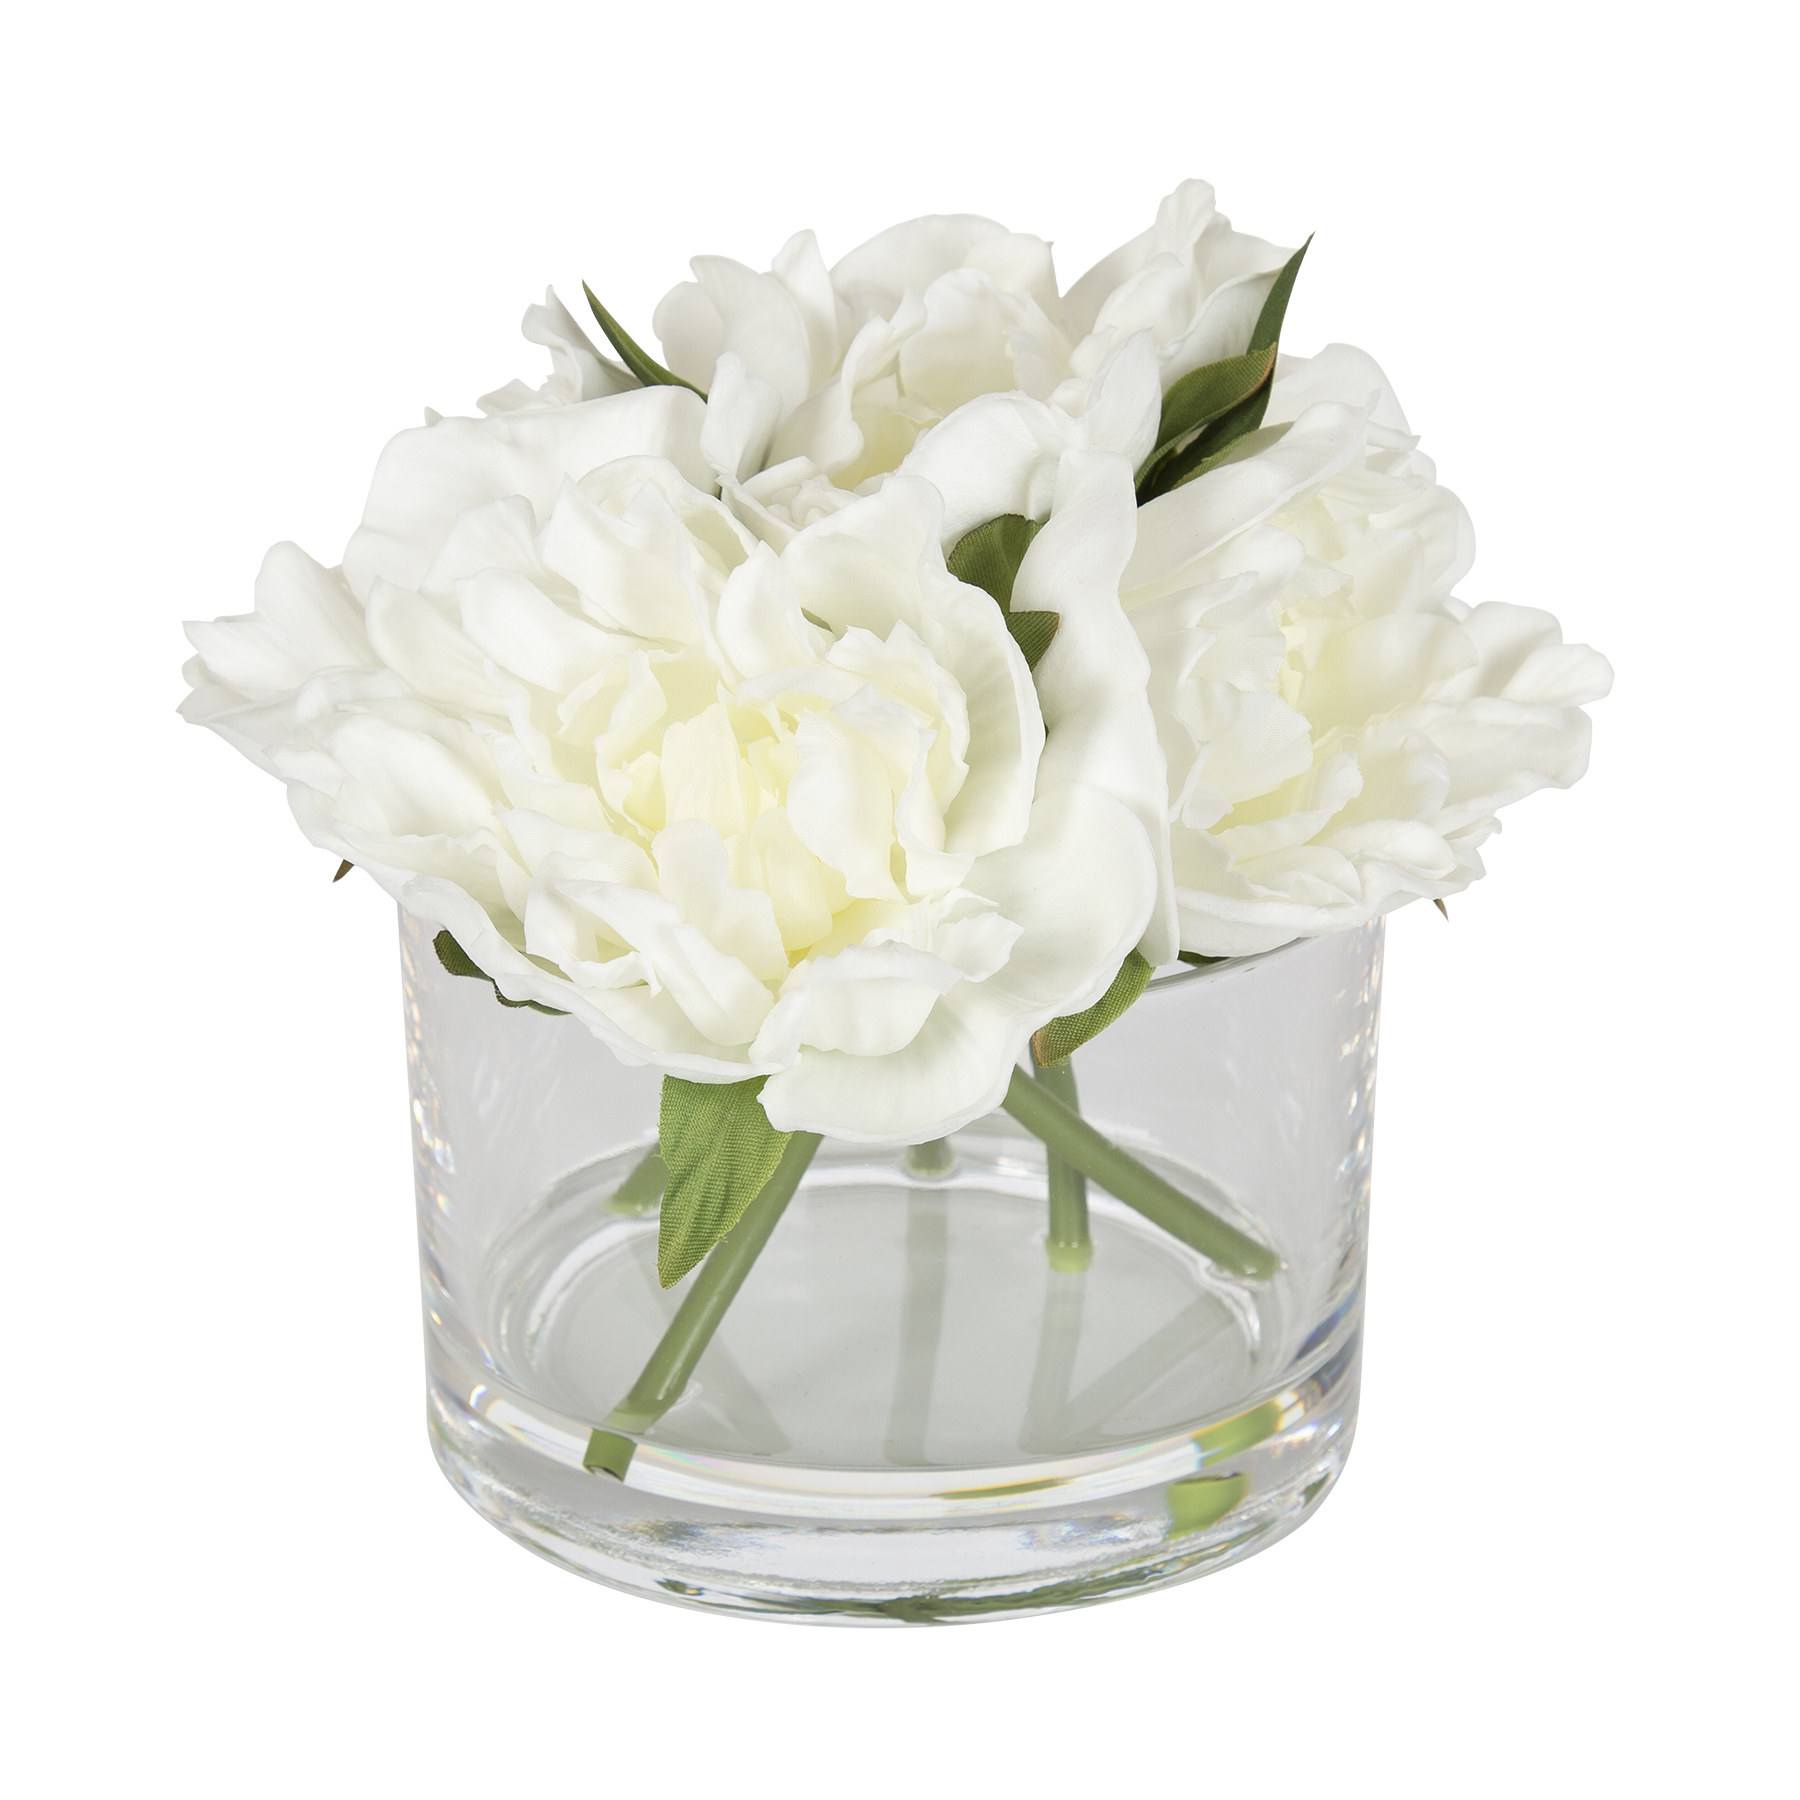 the glass jar filled with white peonies